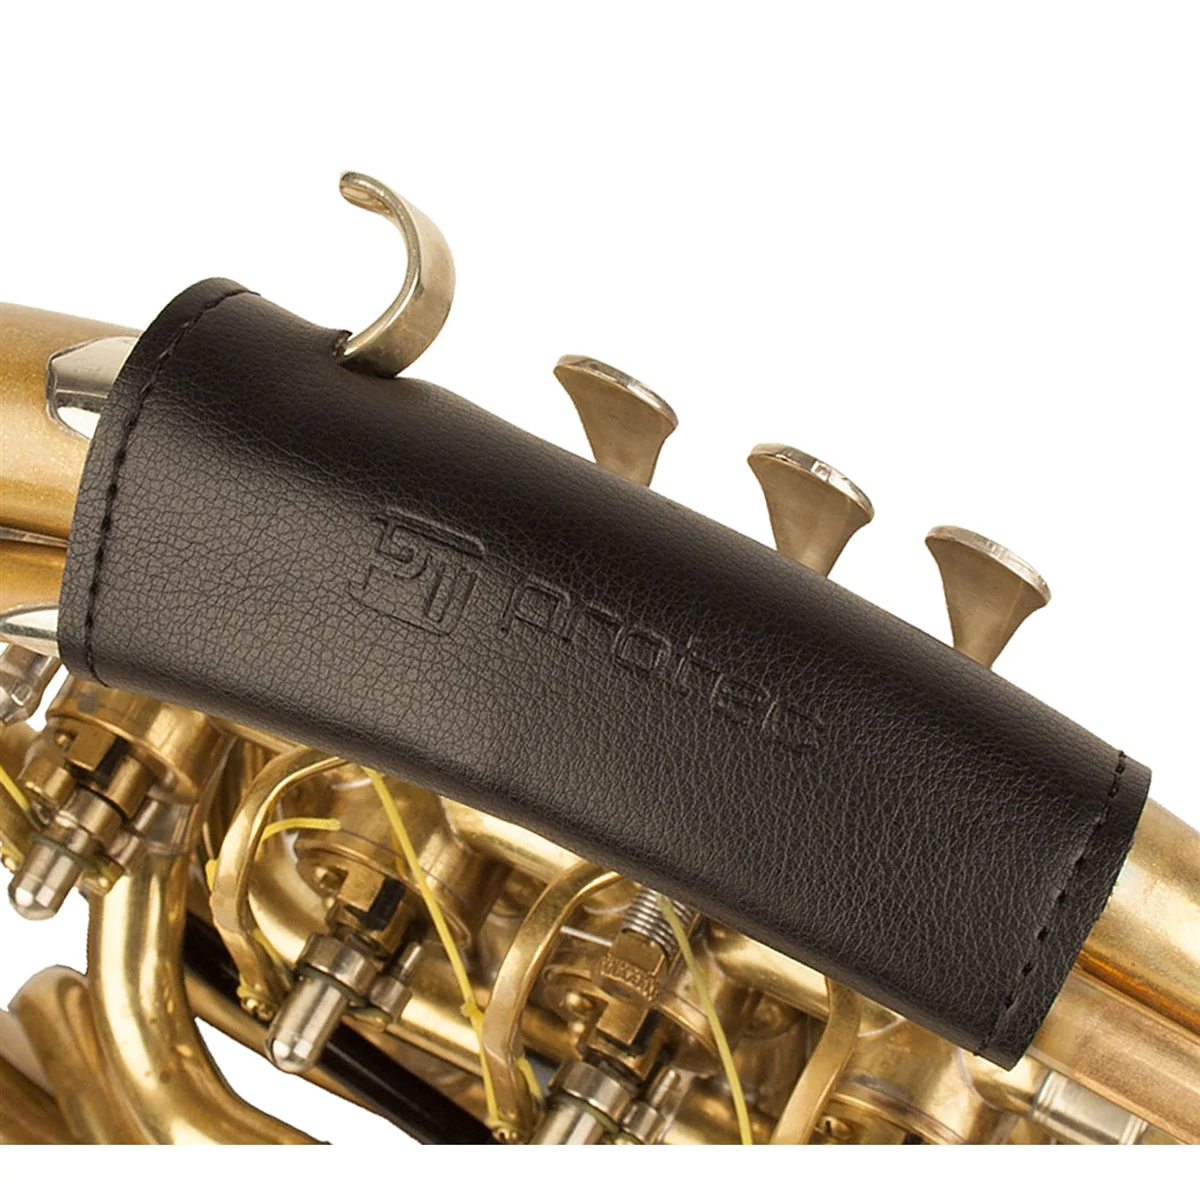 PROTEC French Horn Leather Hand Guard